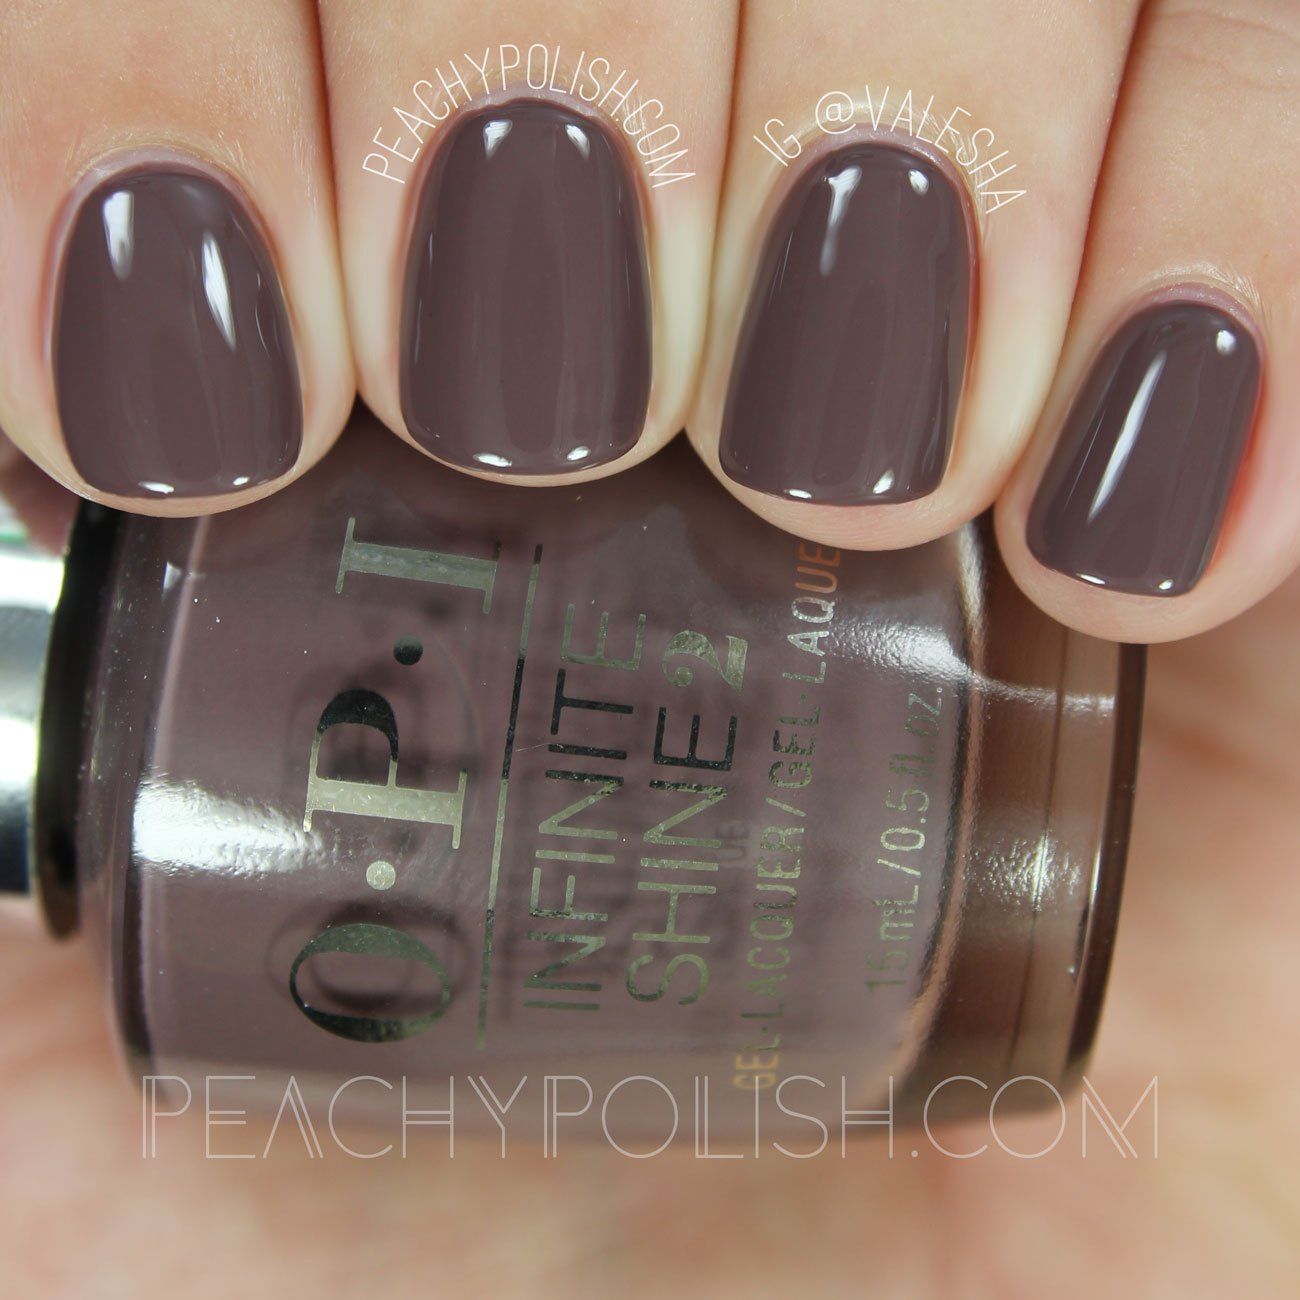 Opi Infinite Shine Iconic Collection Swatches Review Nail Polish Nails Cute Nails